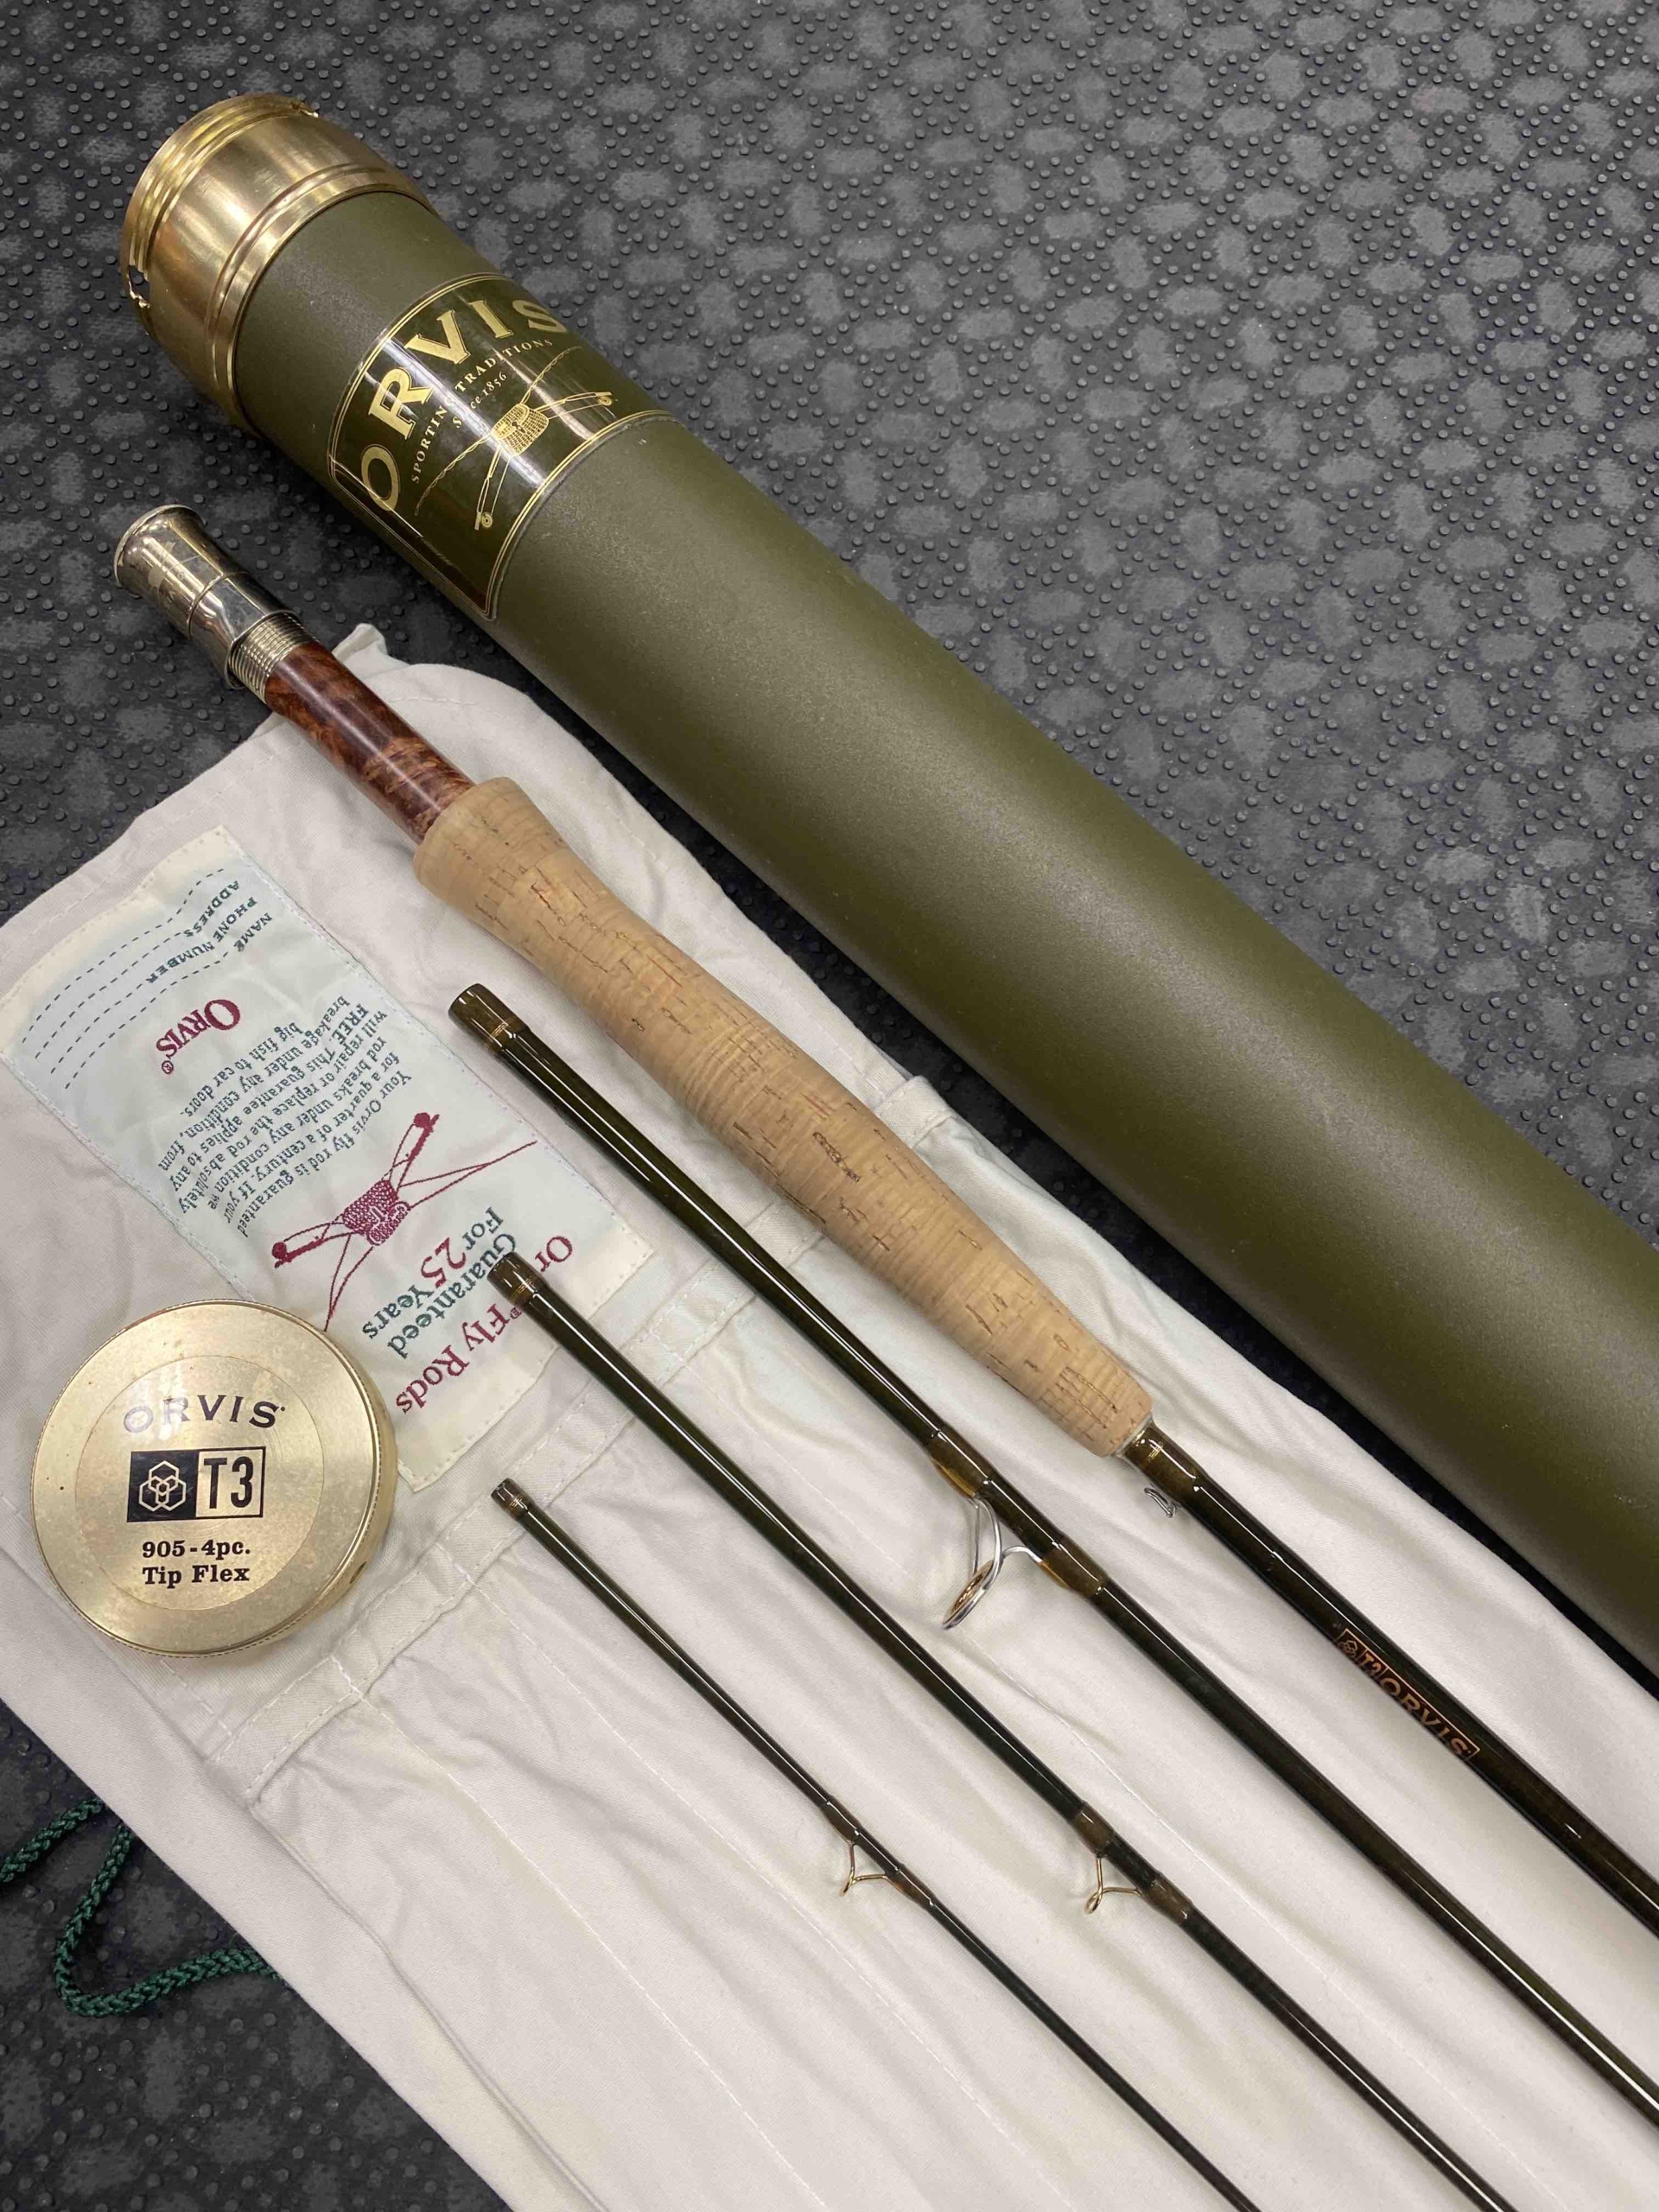 https://thefirstcast.ca/wp-content/uploads/2020/01/Orvis-T3-905-3piece-Tip-Flex-Fly-Rod-AA-scaled.jpg